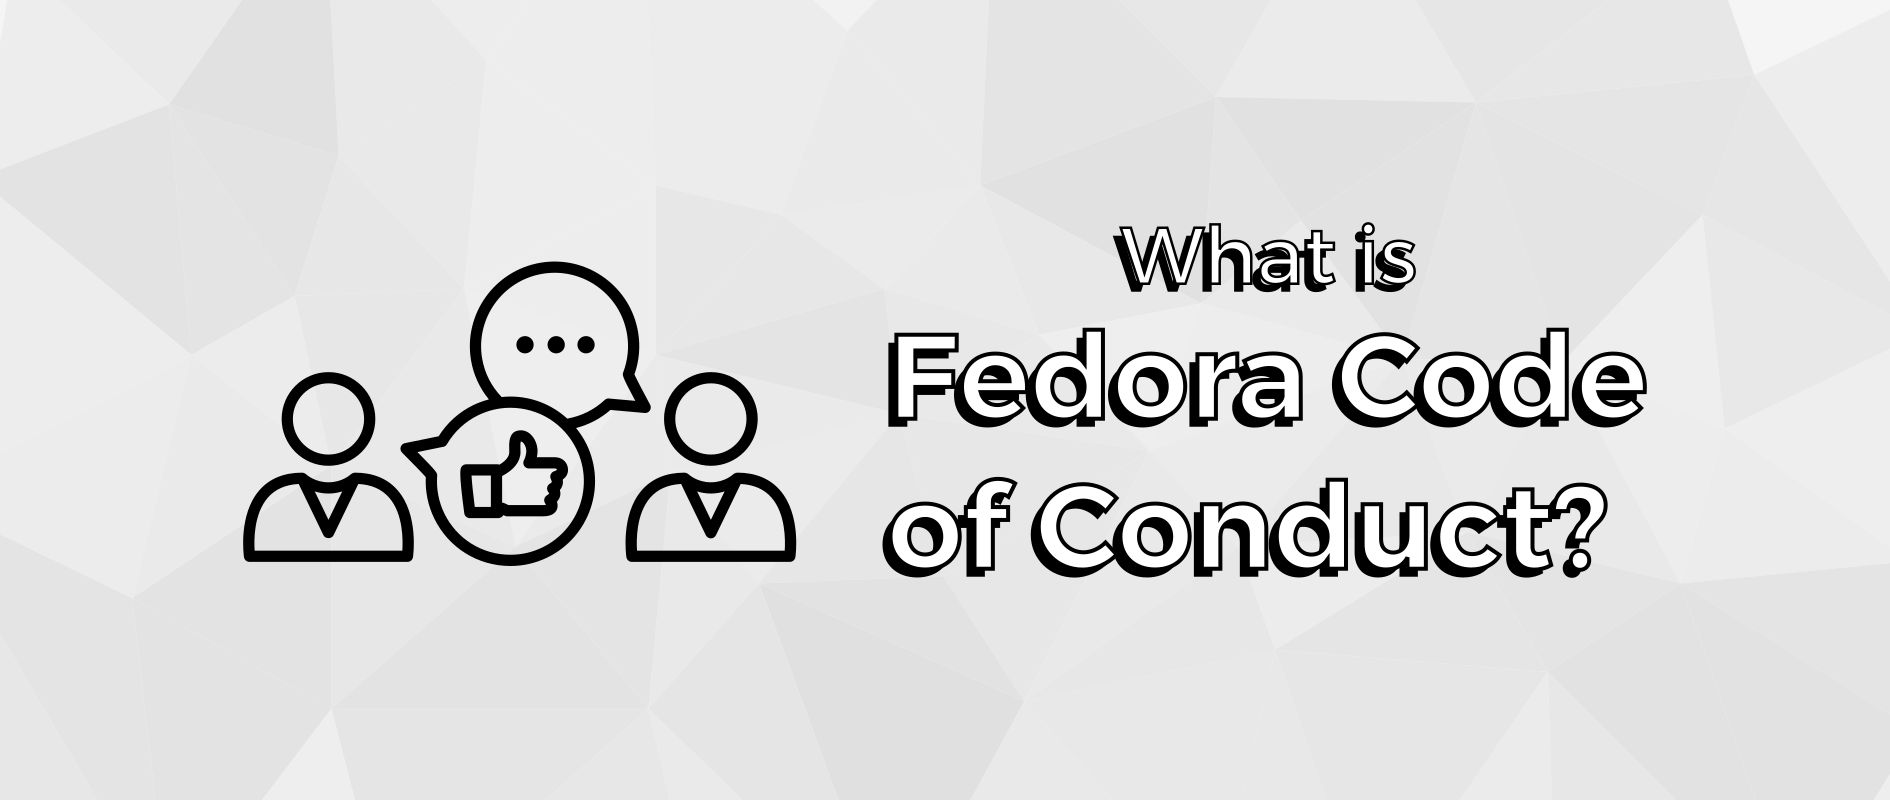 What is the Fedora Code of Conduct?